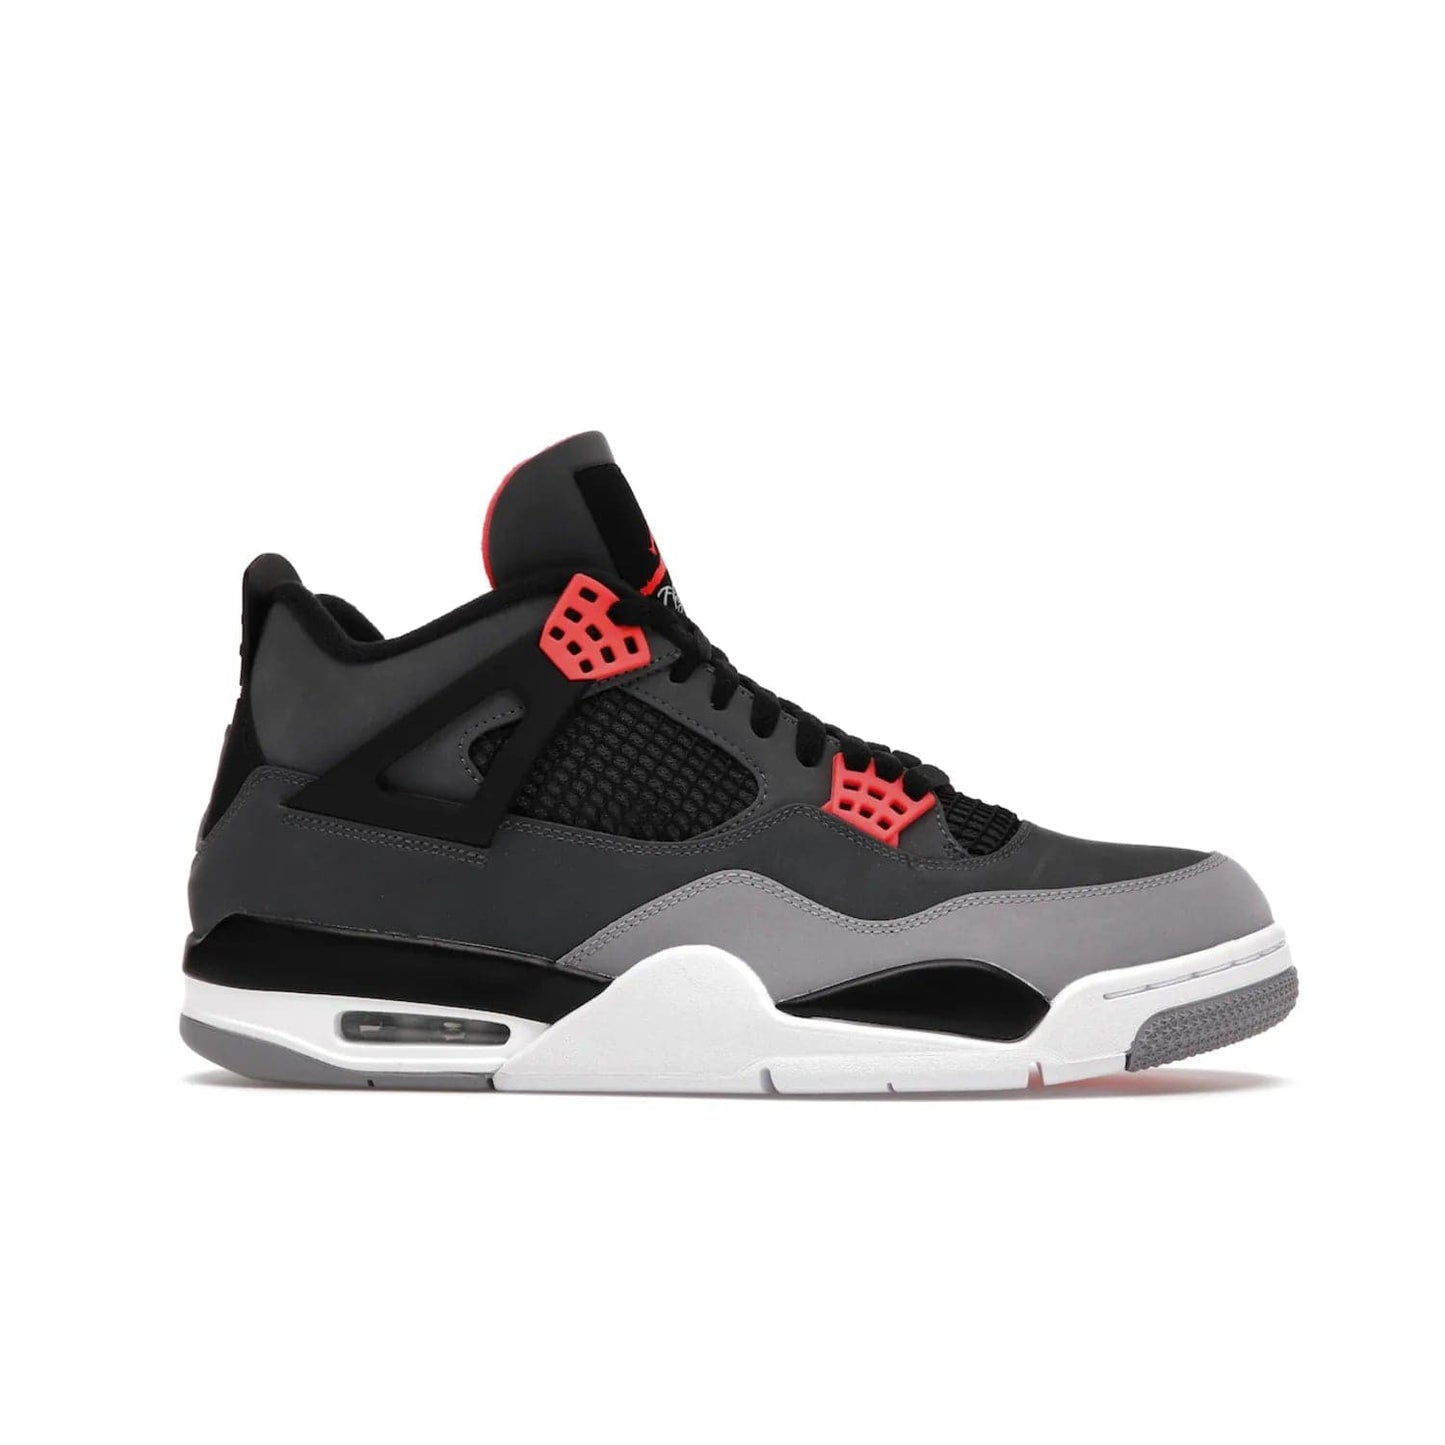 Jordan 4 Retro Infrared - Image 2 - Only at www.BallersClubKickz.com - Introducing the classic & timeless Air Jordan 4 Infrared. Durabuck upper, TPU mesh inserts, tech straps & heel tabs in dark grey and infrared accents. White sole with visible Air units. Out June 15, 2022. Get your pair now!